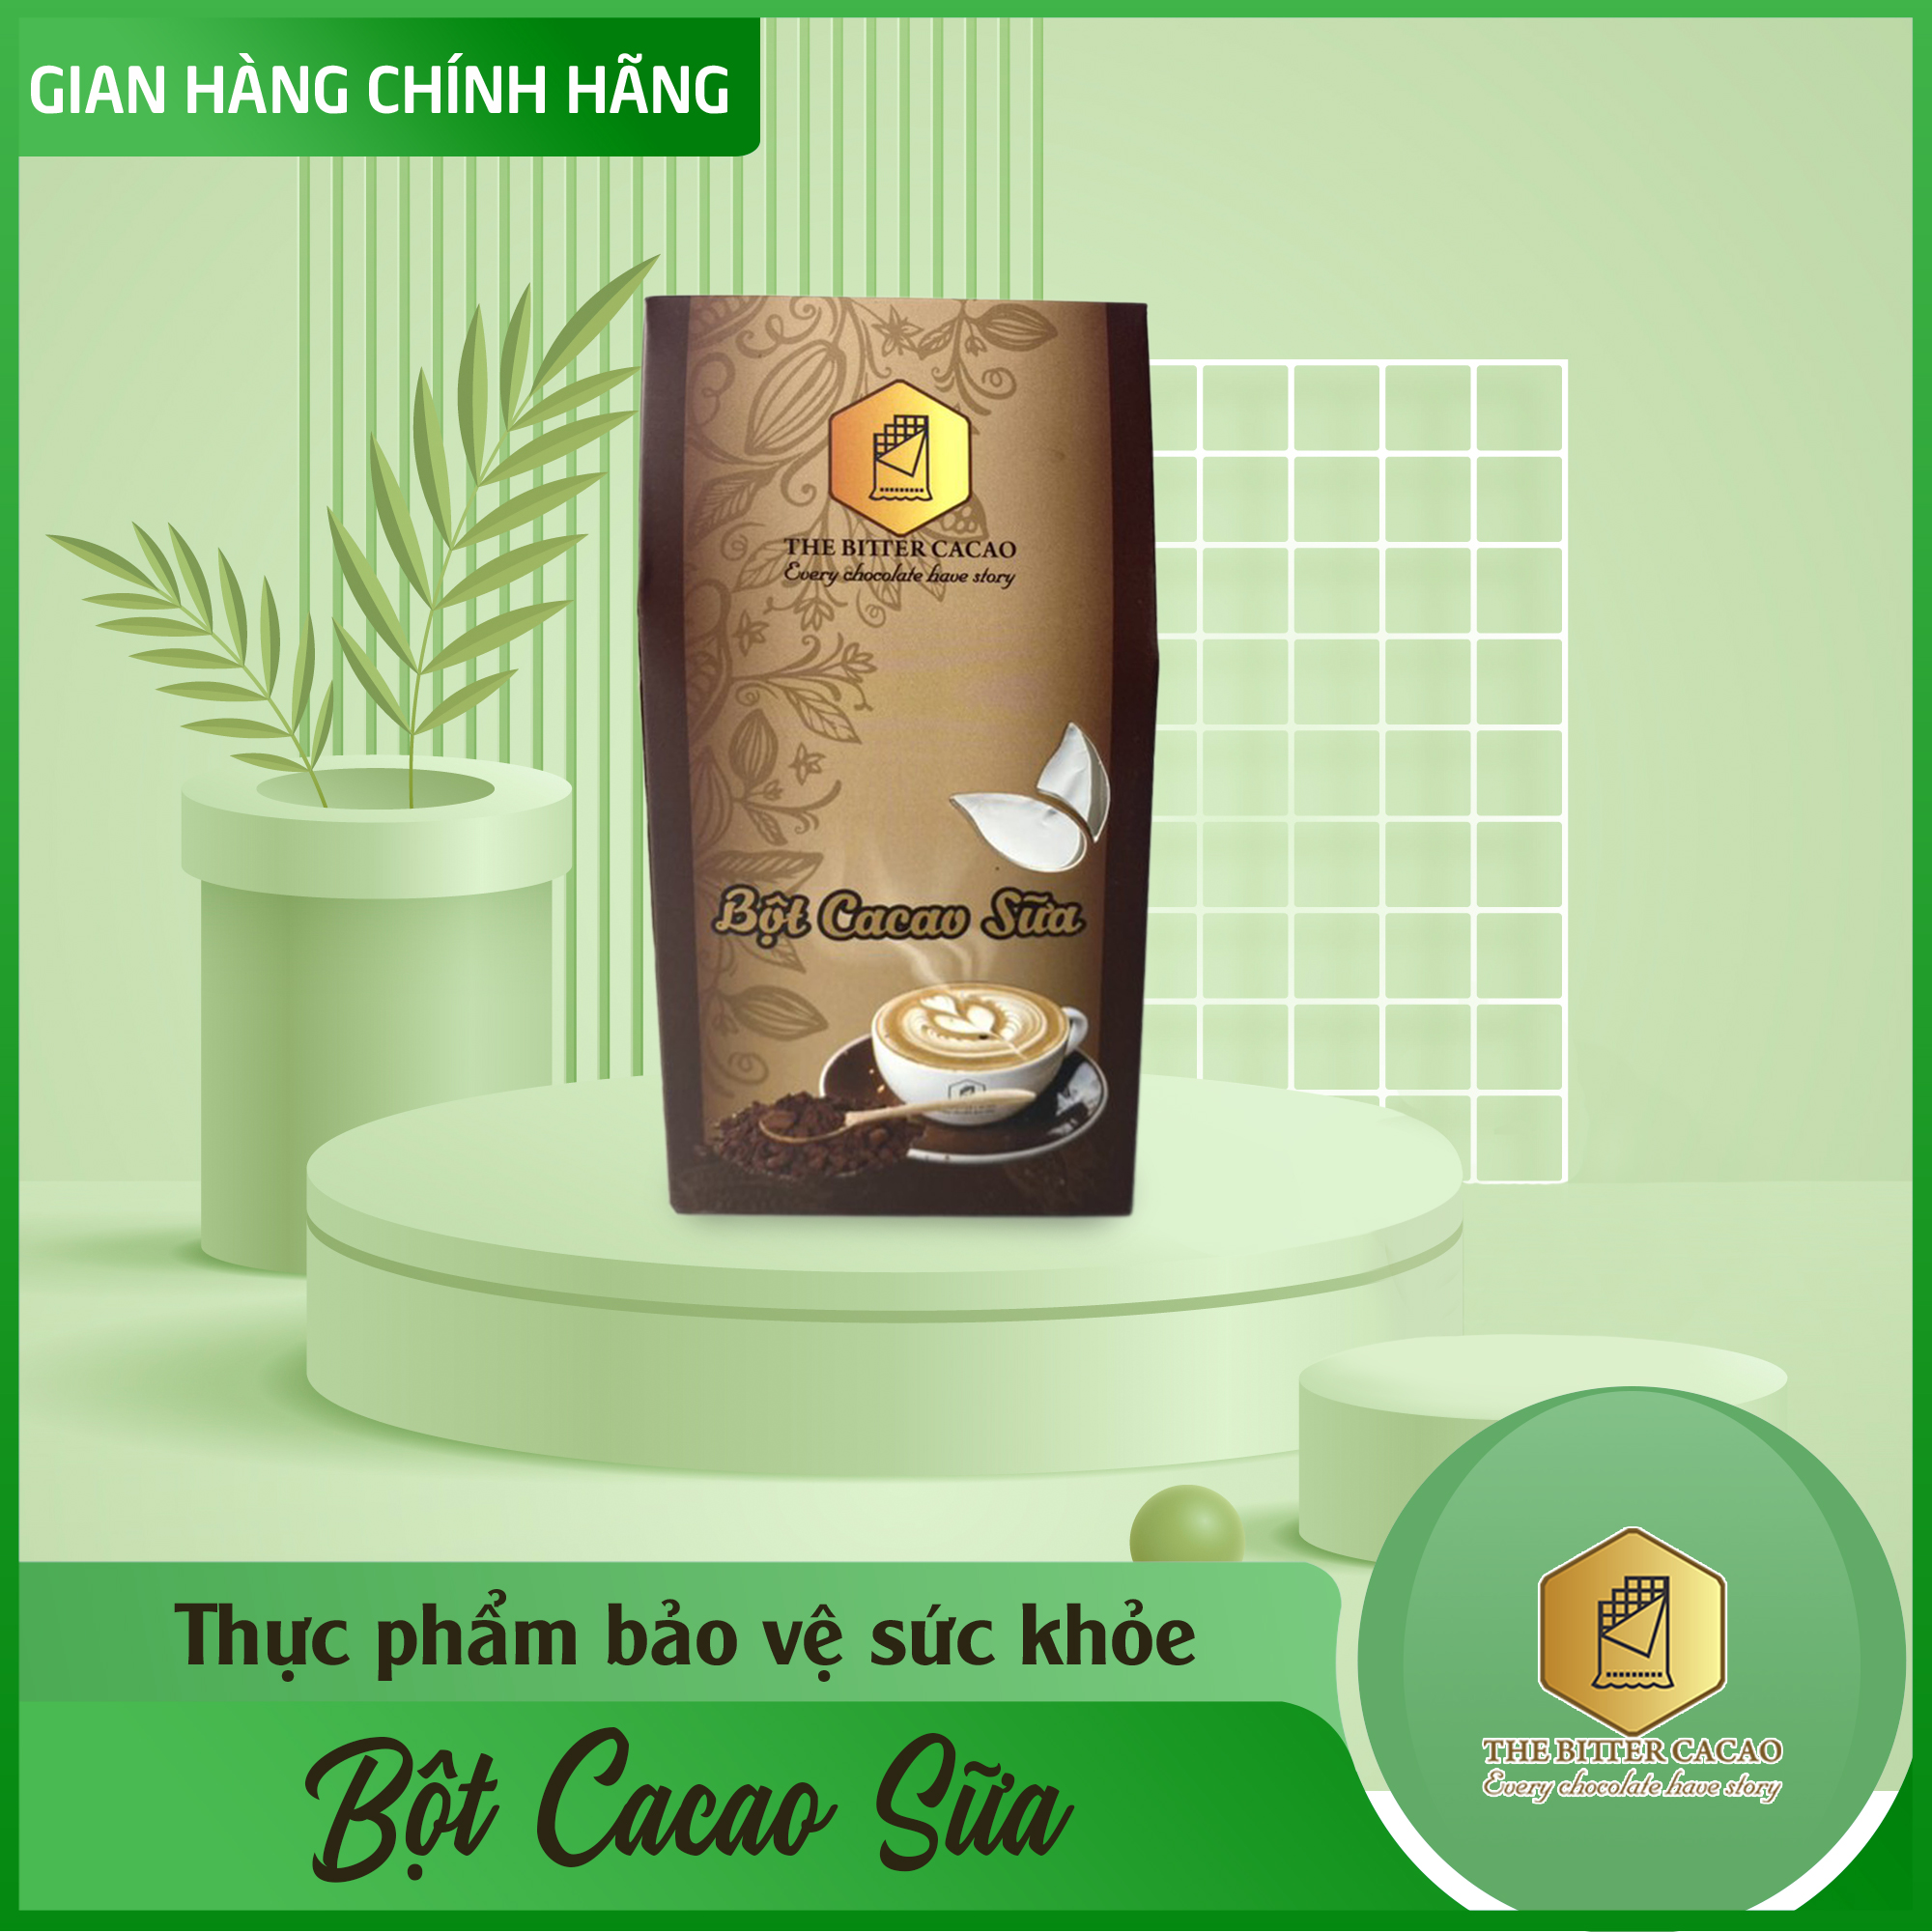 Bột cacao sữa The Bitter Cacao